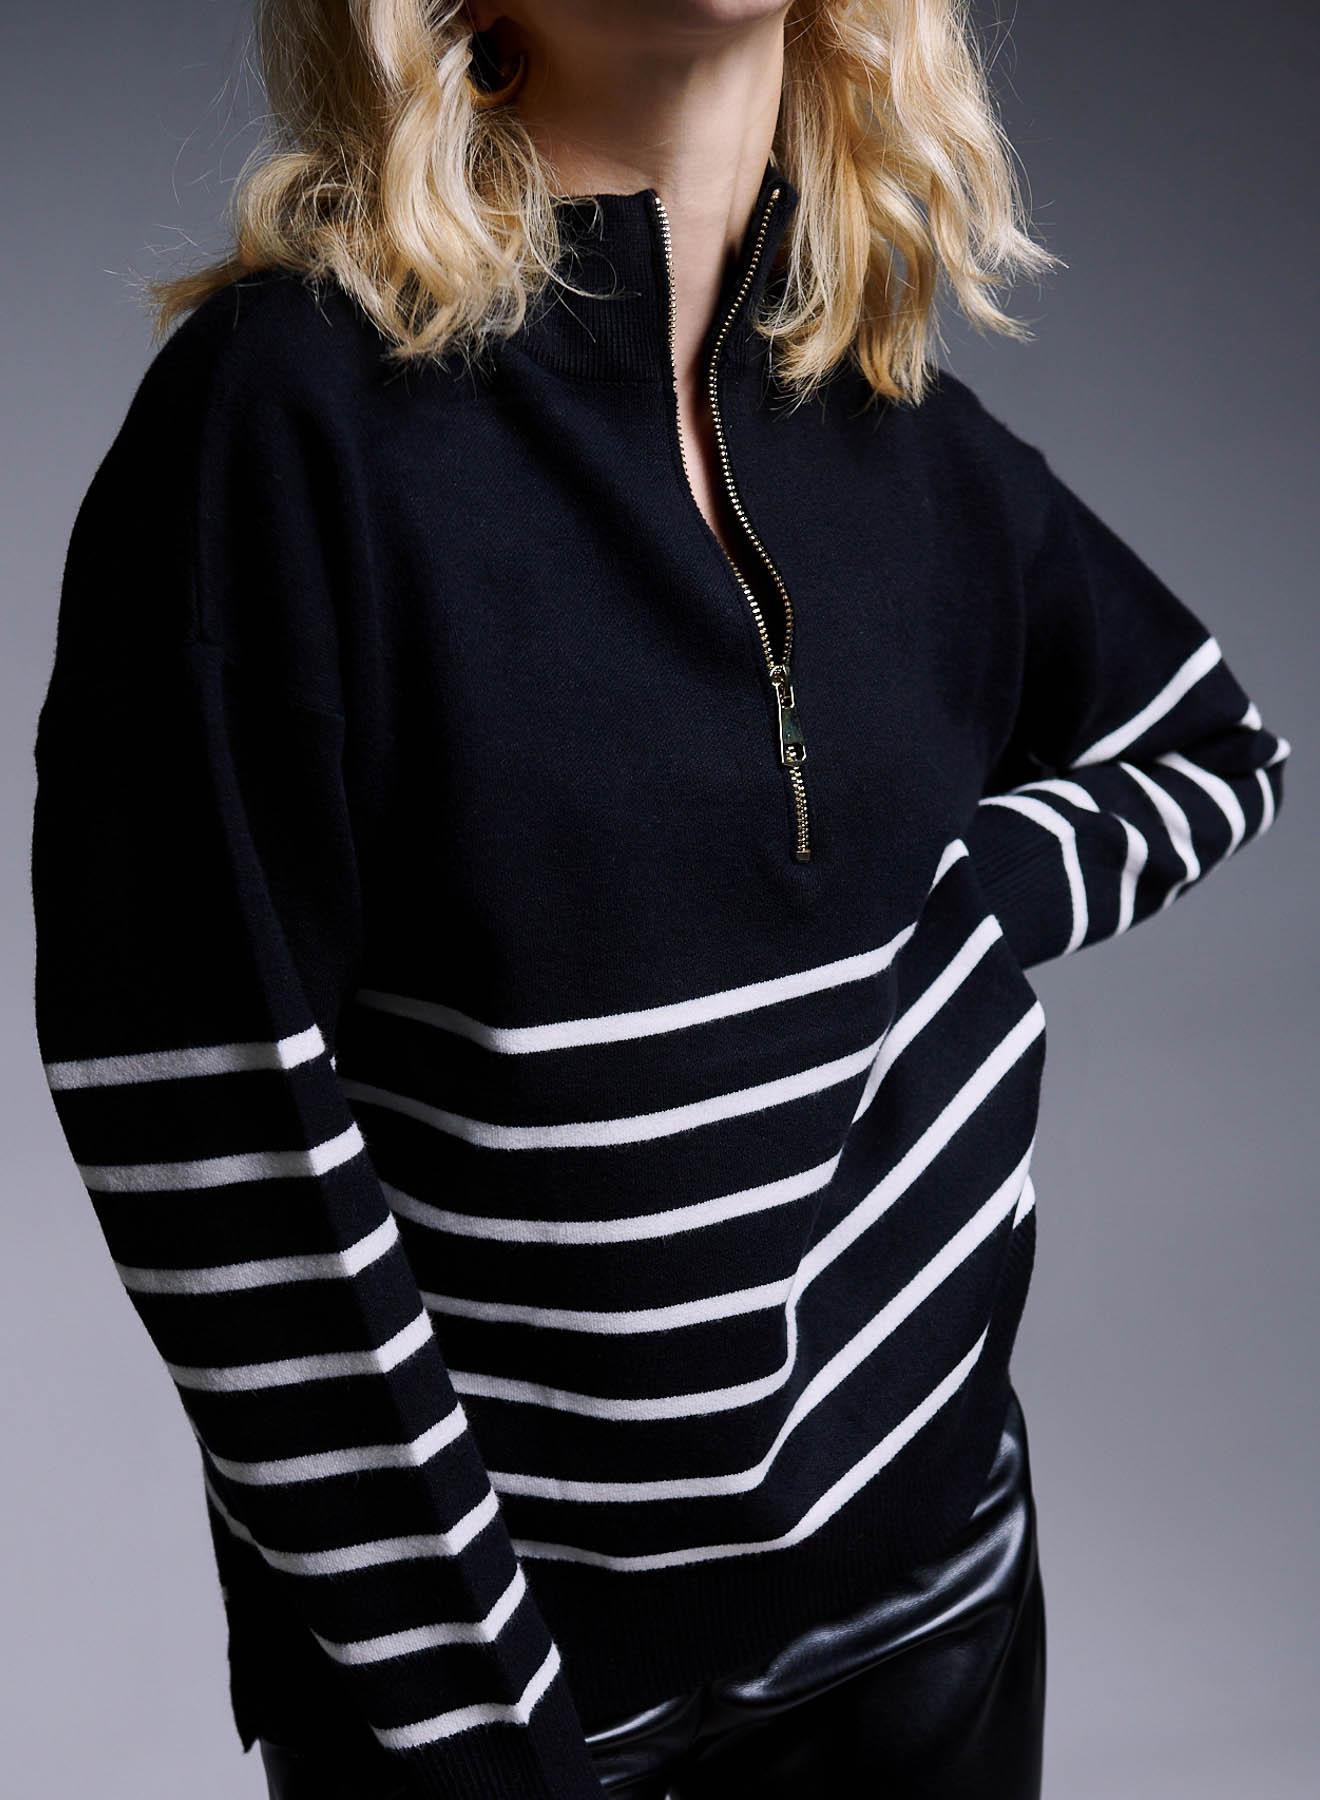 Half-turtleneck knit blouse with stripes and gold zipper - 2